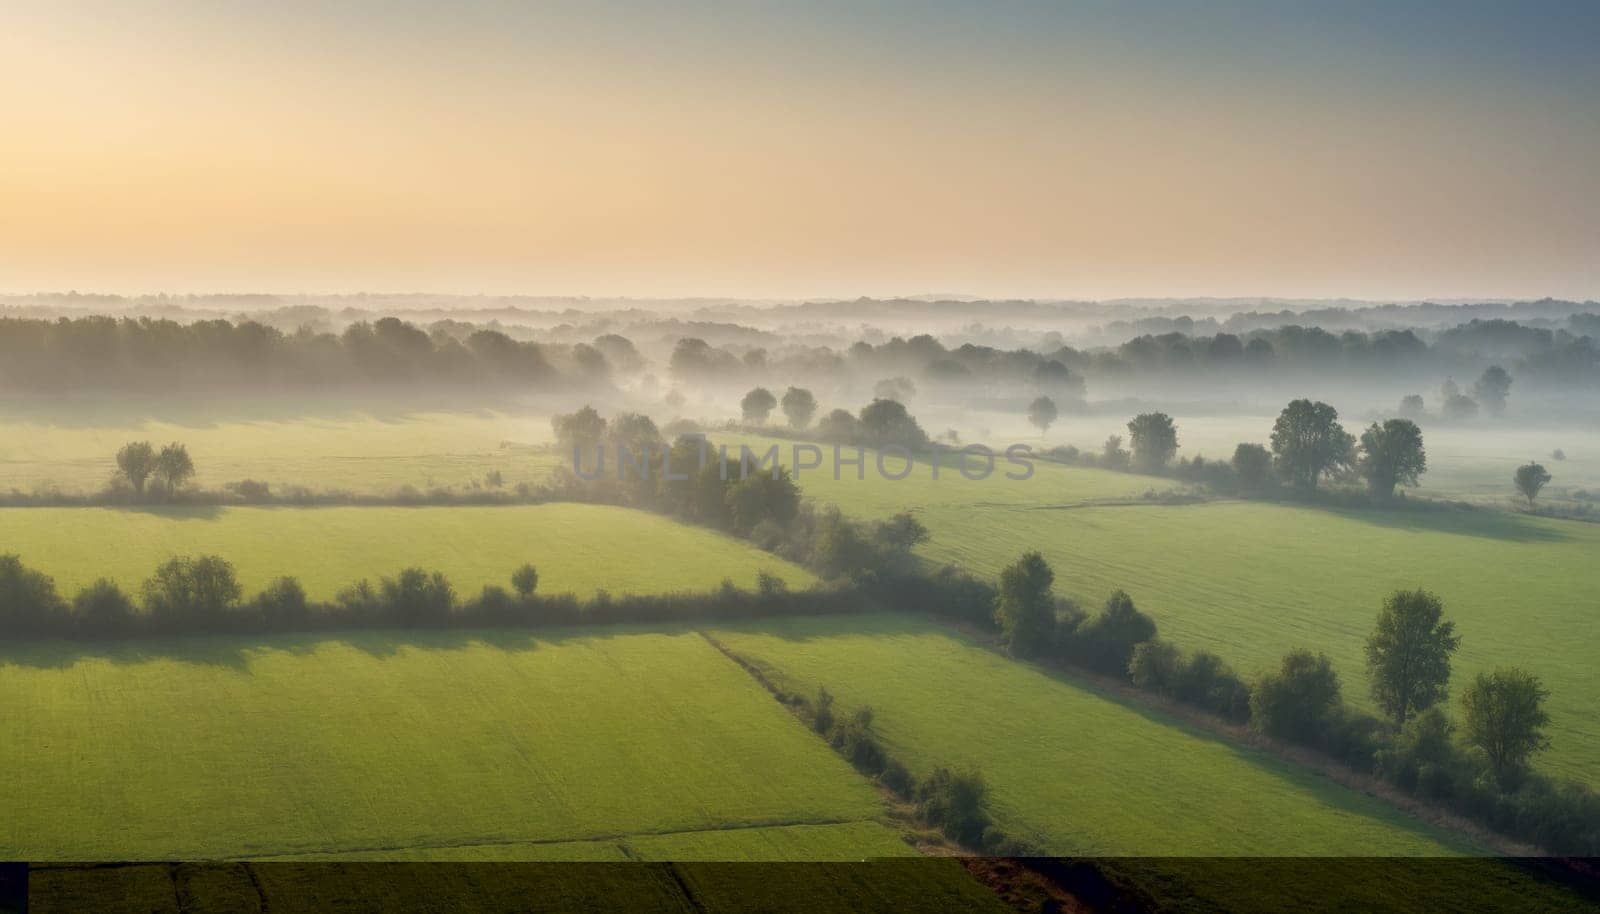 A misty sunrise paints the landscape in soft, ethereal hues. Layers of fog drape over rolling hills, while green fields stretch out in the foreground. The sun casts a warm glow, transforming the scenery into a dreamlike vista.